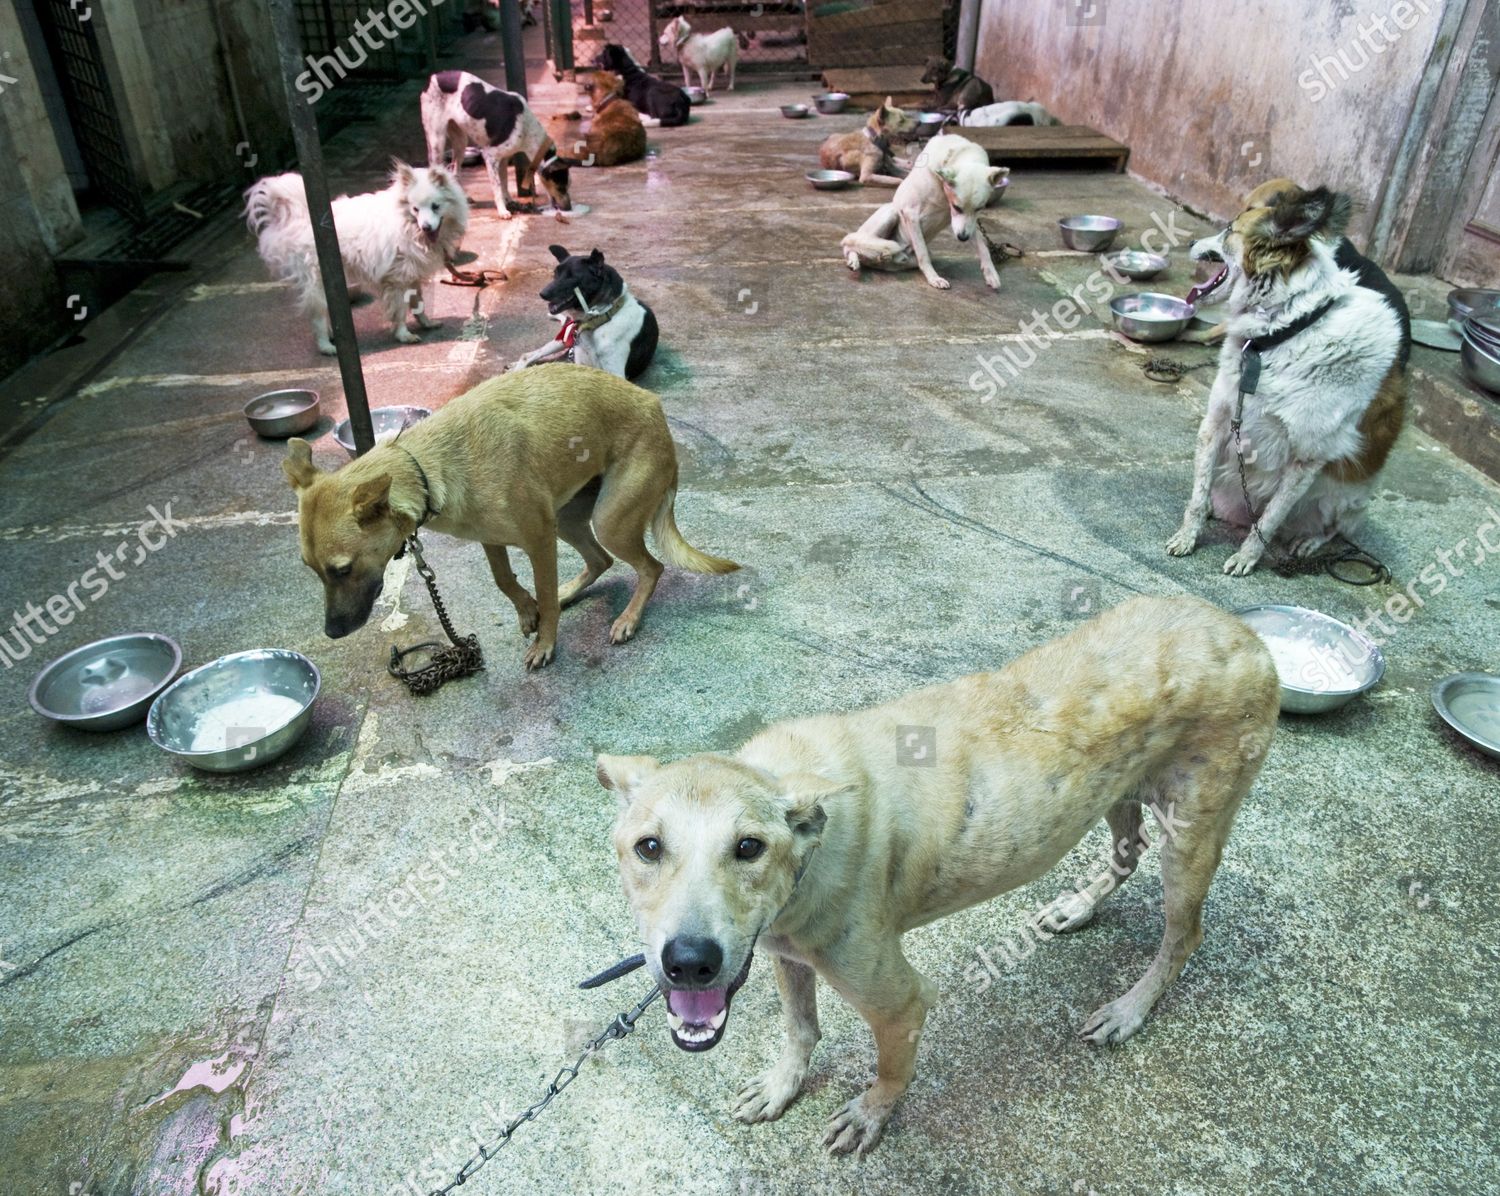 Kennel Area Street Dogs Cupa Centre Editorial Stock Photo - Stock Image |  Shutterstock Editorial